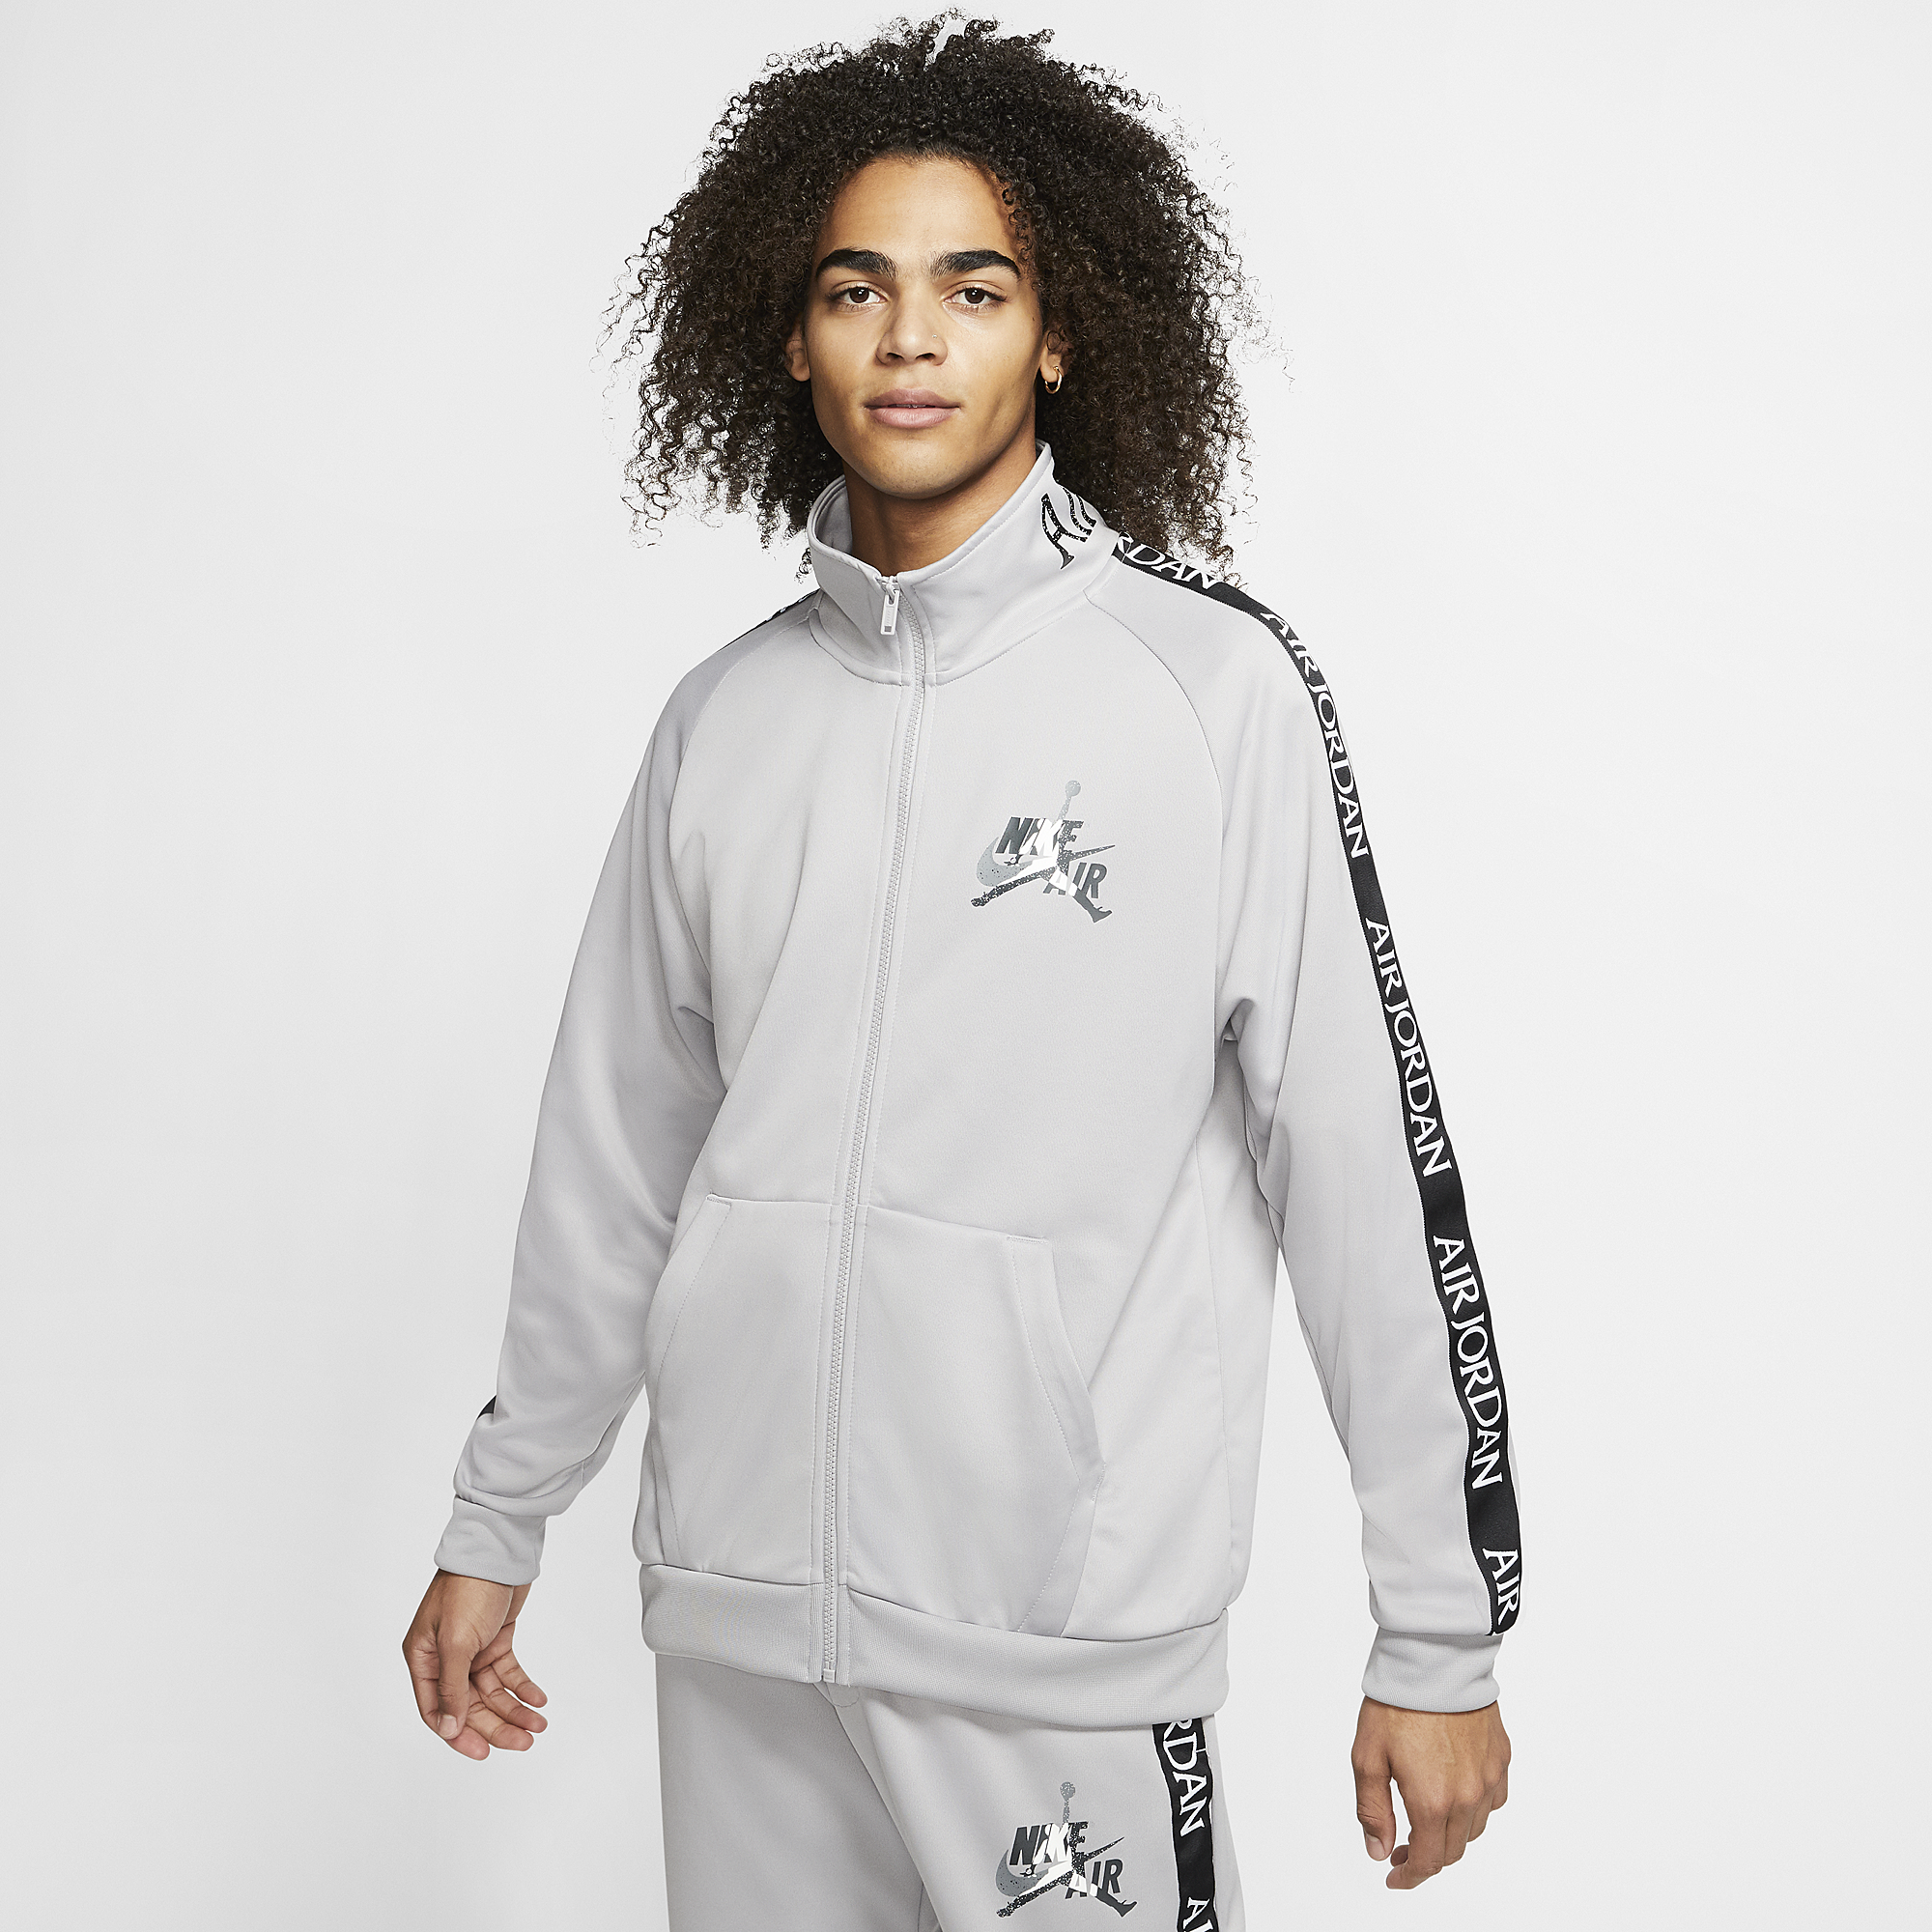 eastbay nike sweat suits